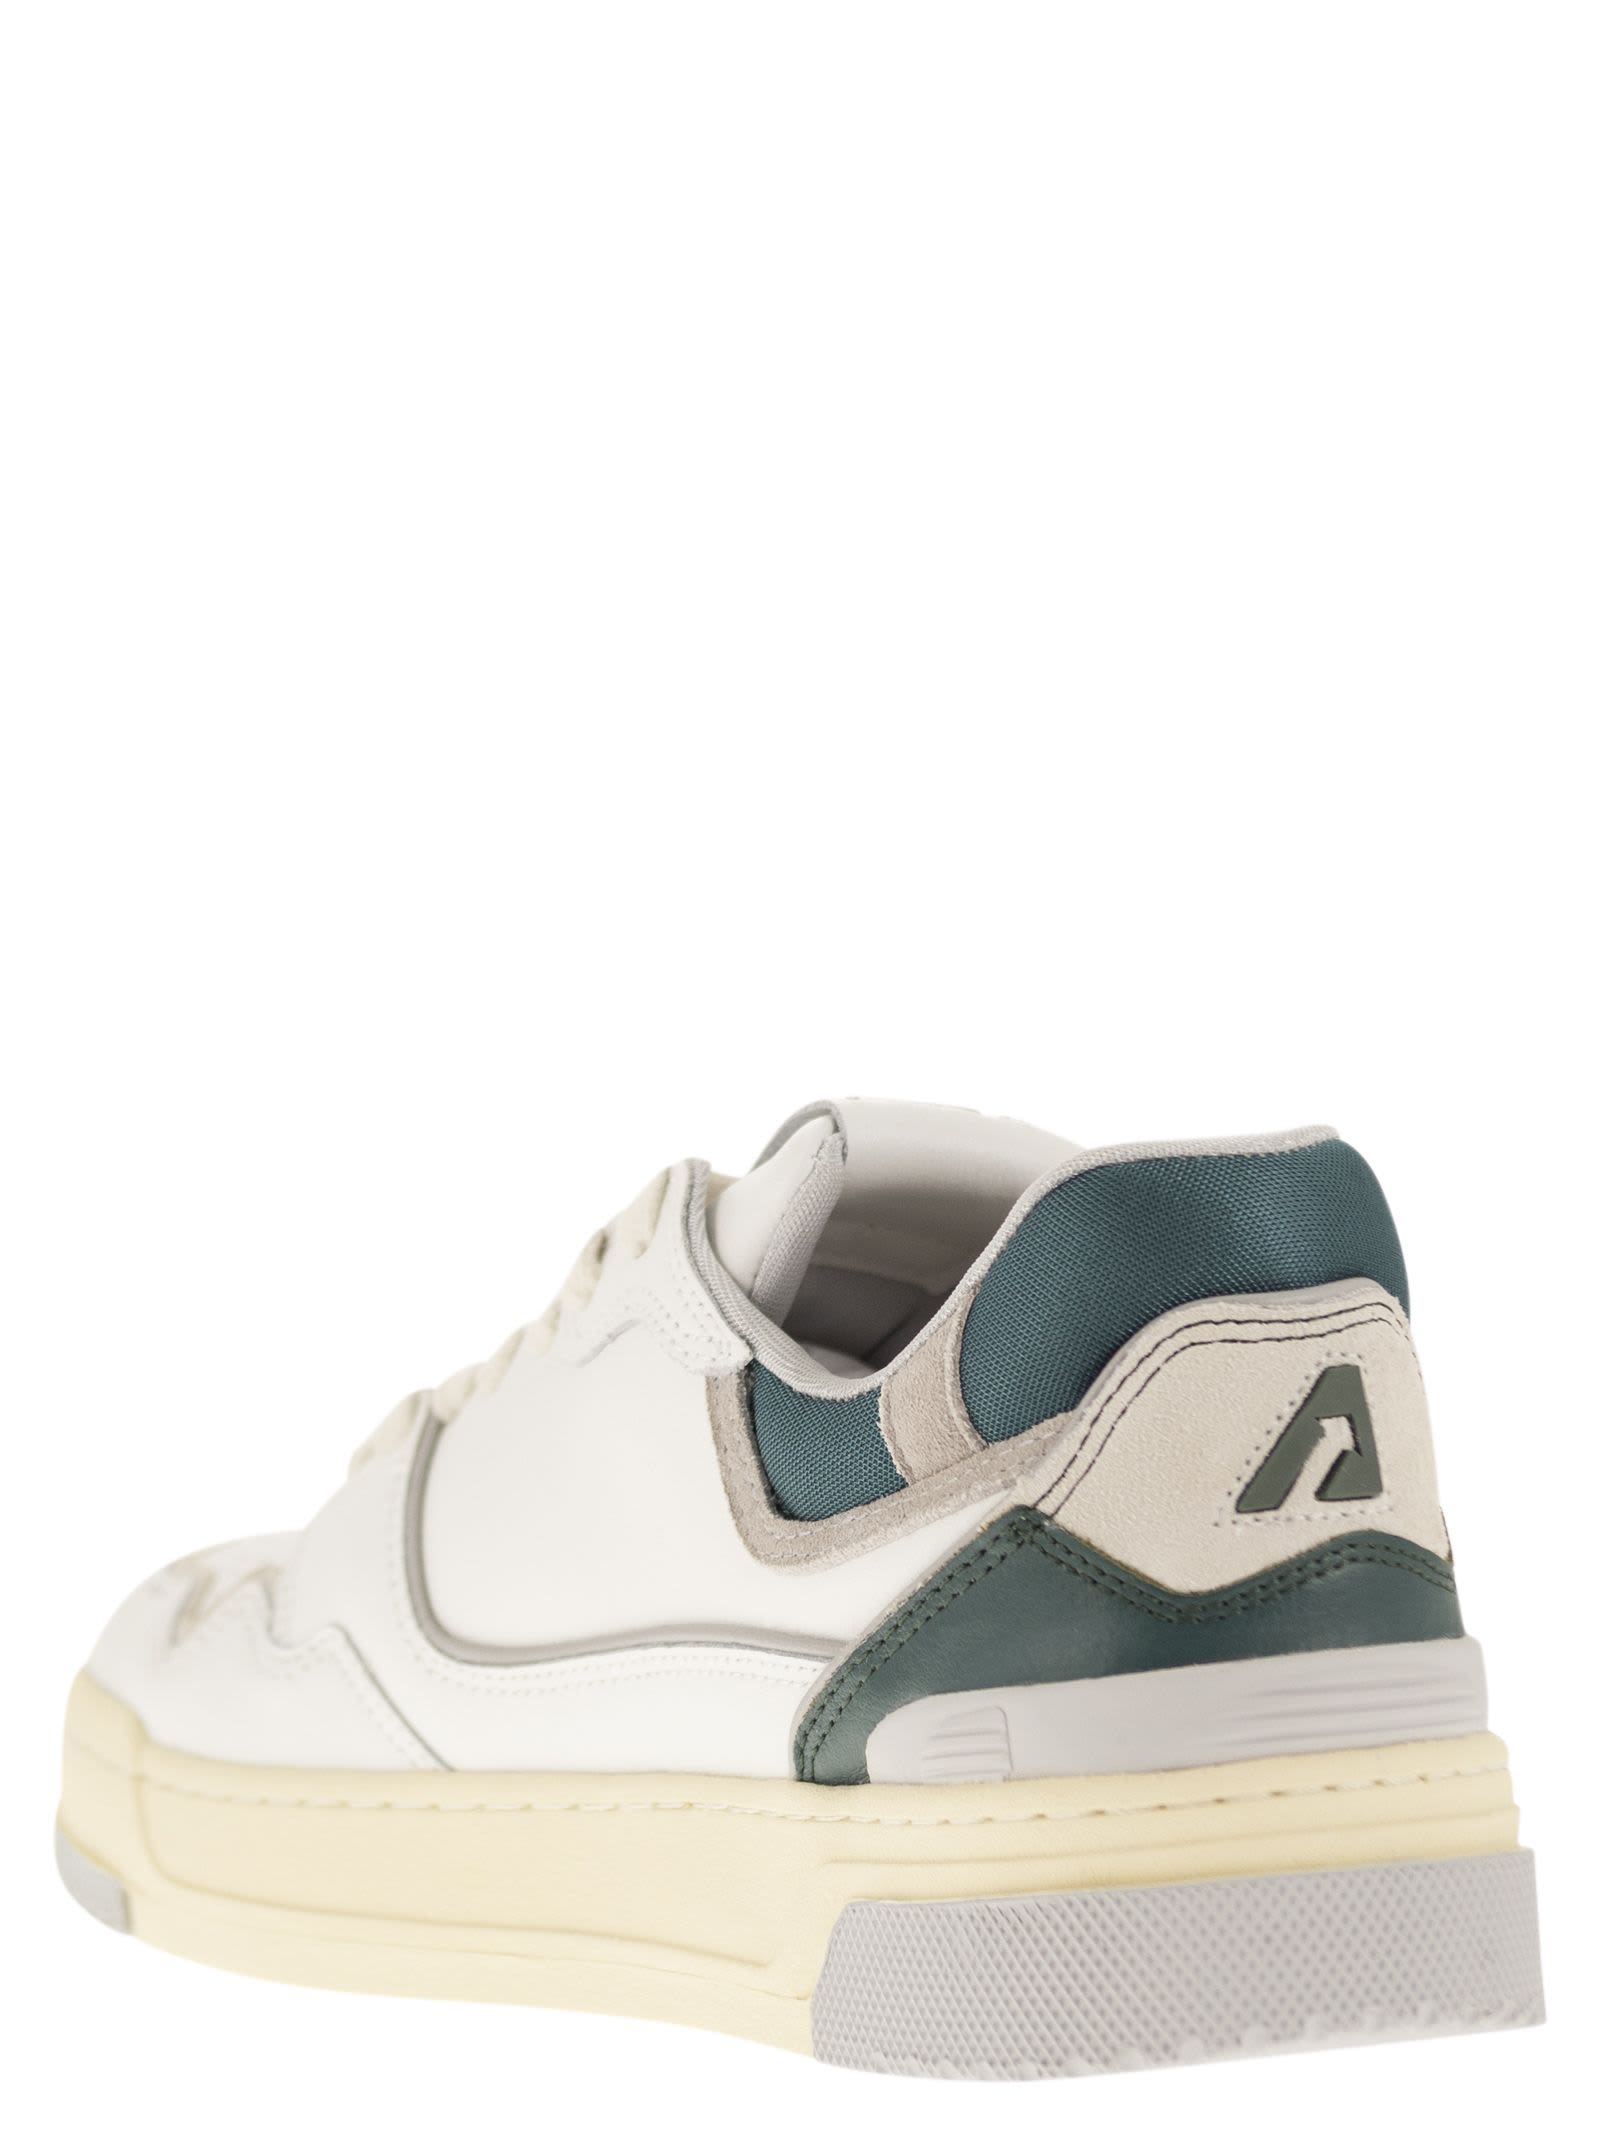 Shop Autry Clc - Leather Sneakers In White Forest